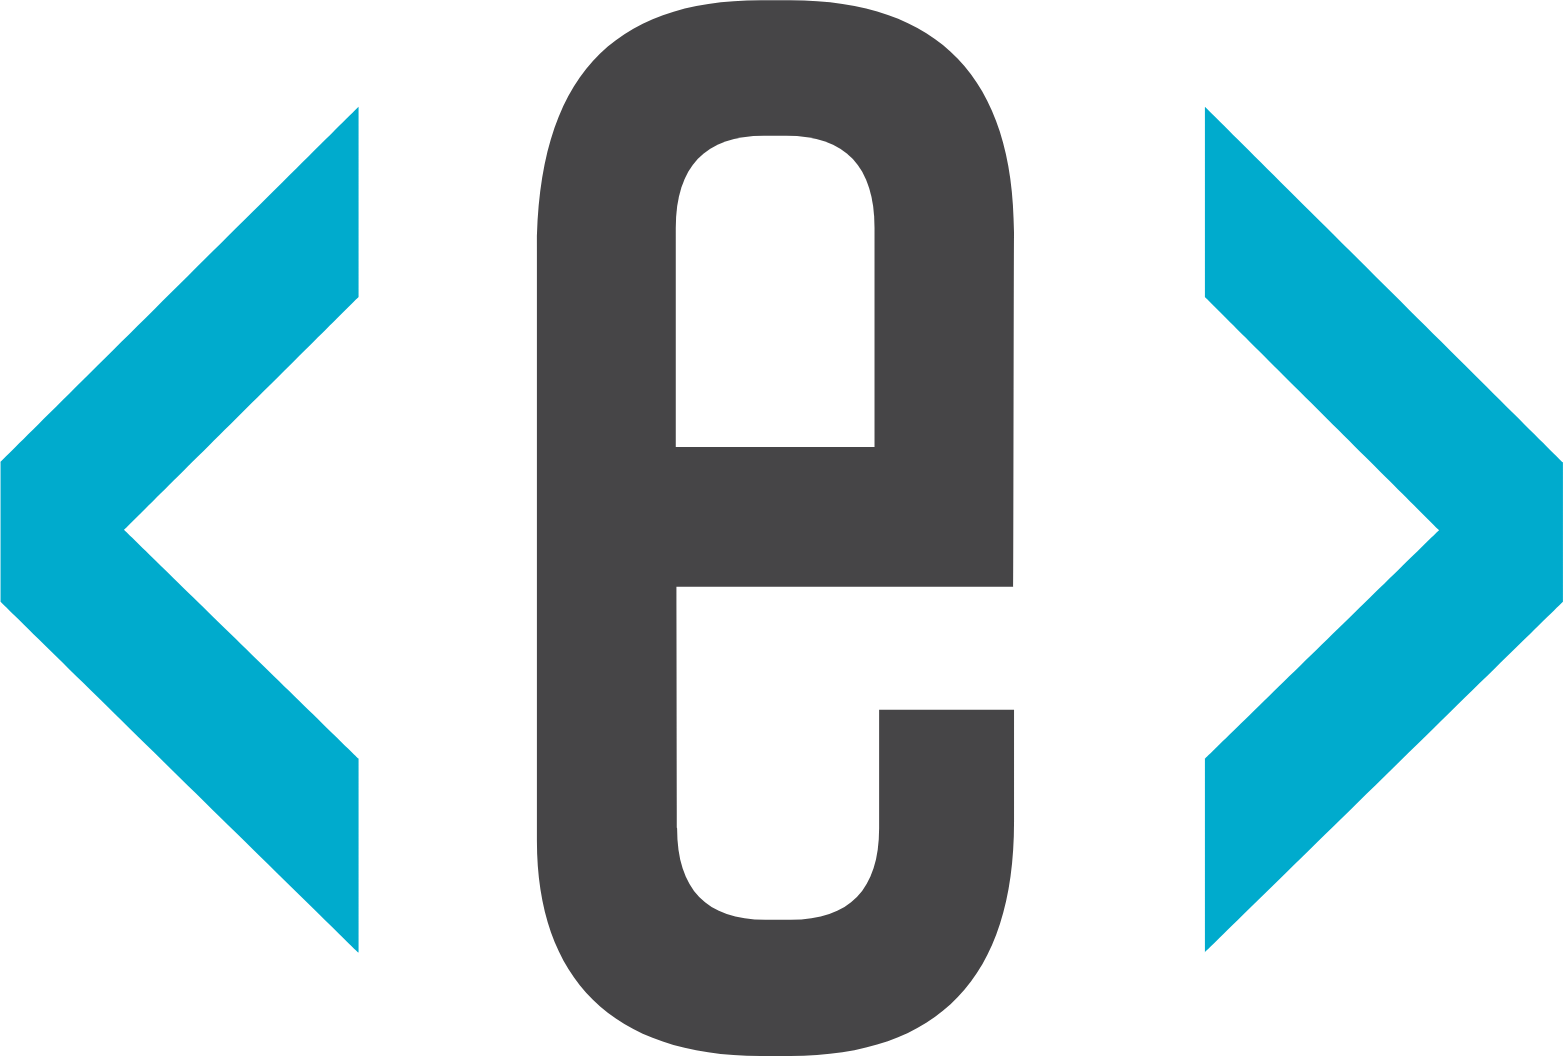 System1 logo in transparent PNG and vectorized SVG formats